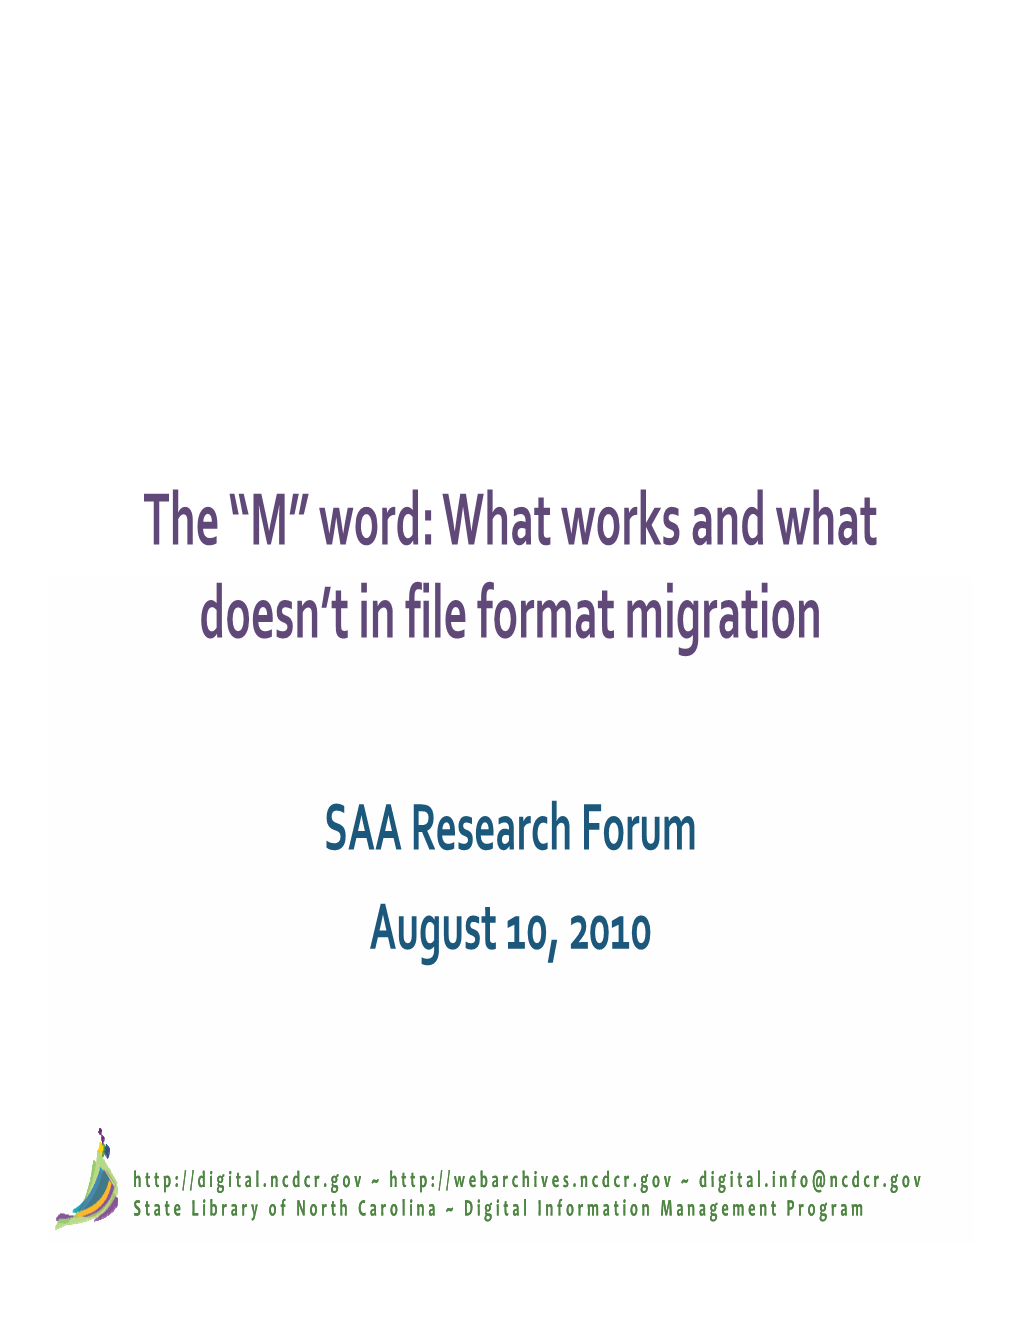 The “M” Word: What Works and What Doesn't in File Format Migration